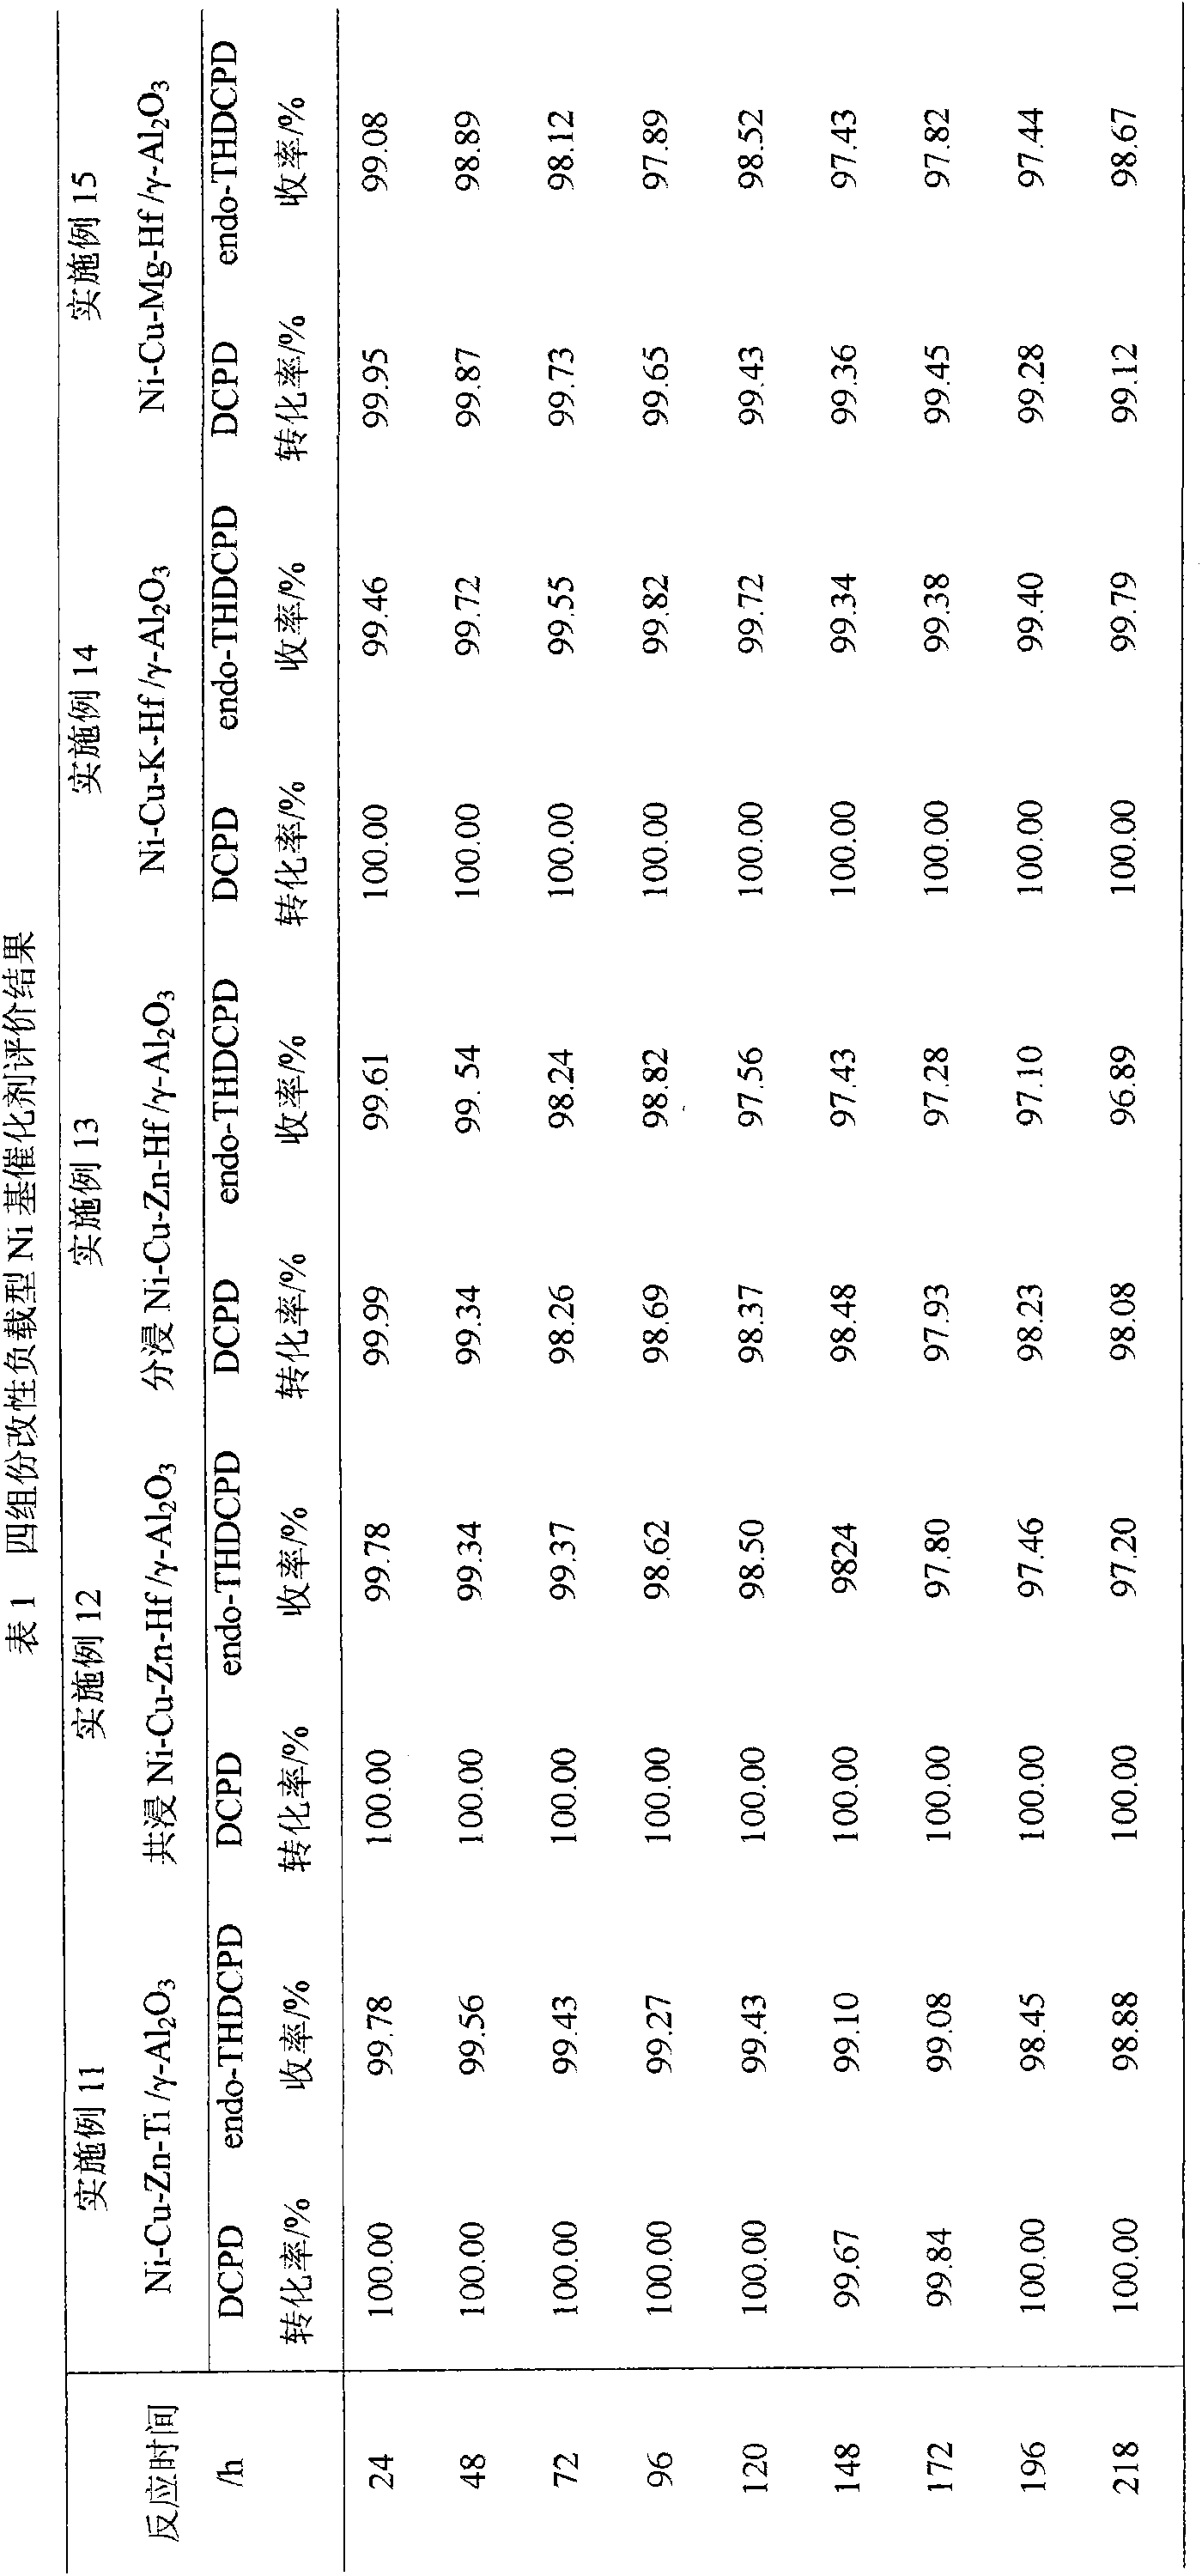 Supported Ni-based catalyst for DCPD (dicyclopentadiene) continuous hydrogenation and hydrogenating method